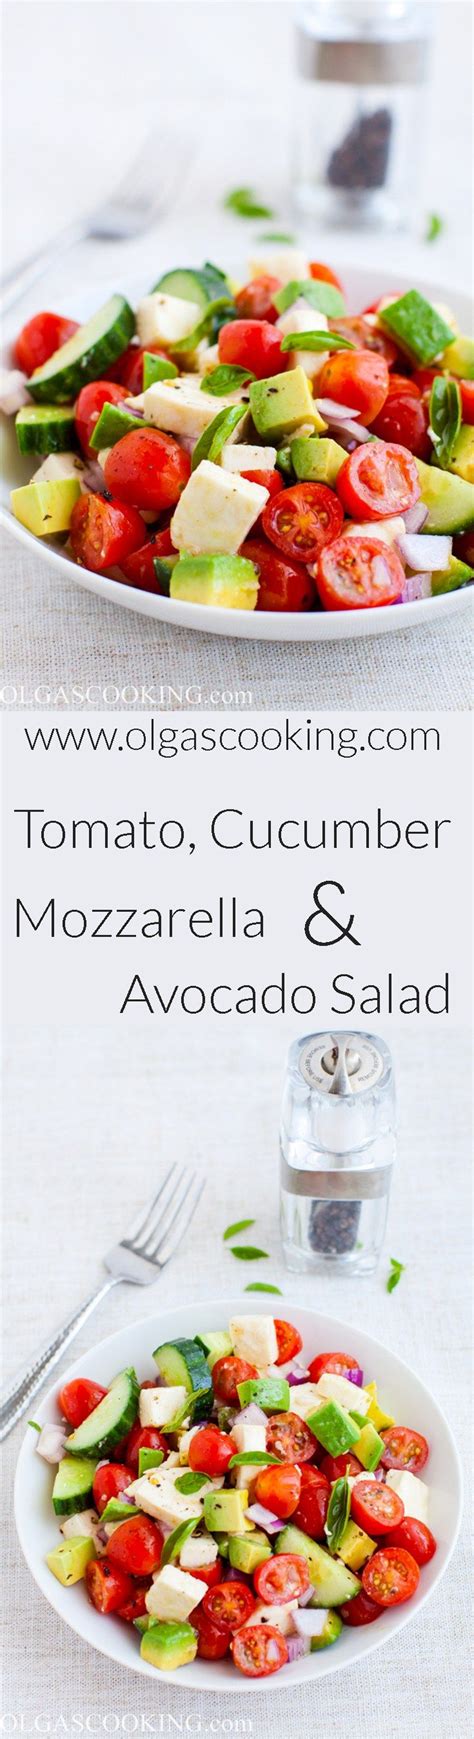 The perfect side dish with anything you're grilling, or double the portion as a main dish. Tomato, Cucumber, Mozzarella and Avocado Salad - Olgas ...